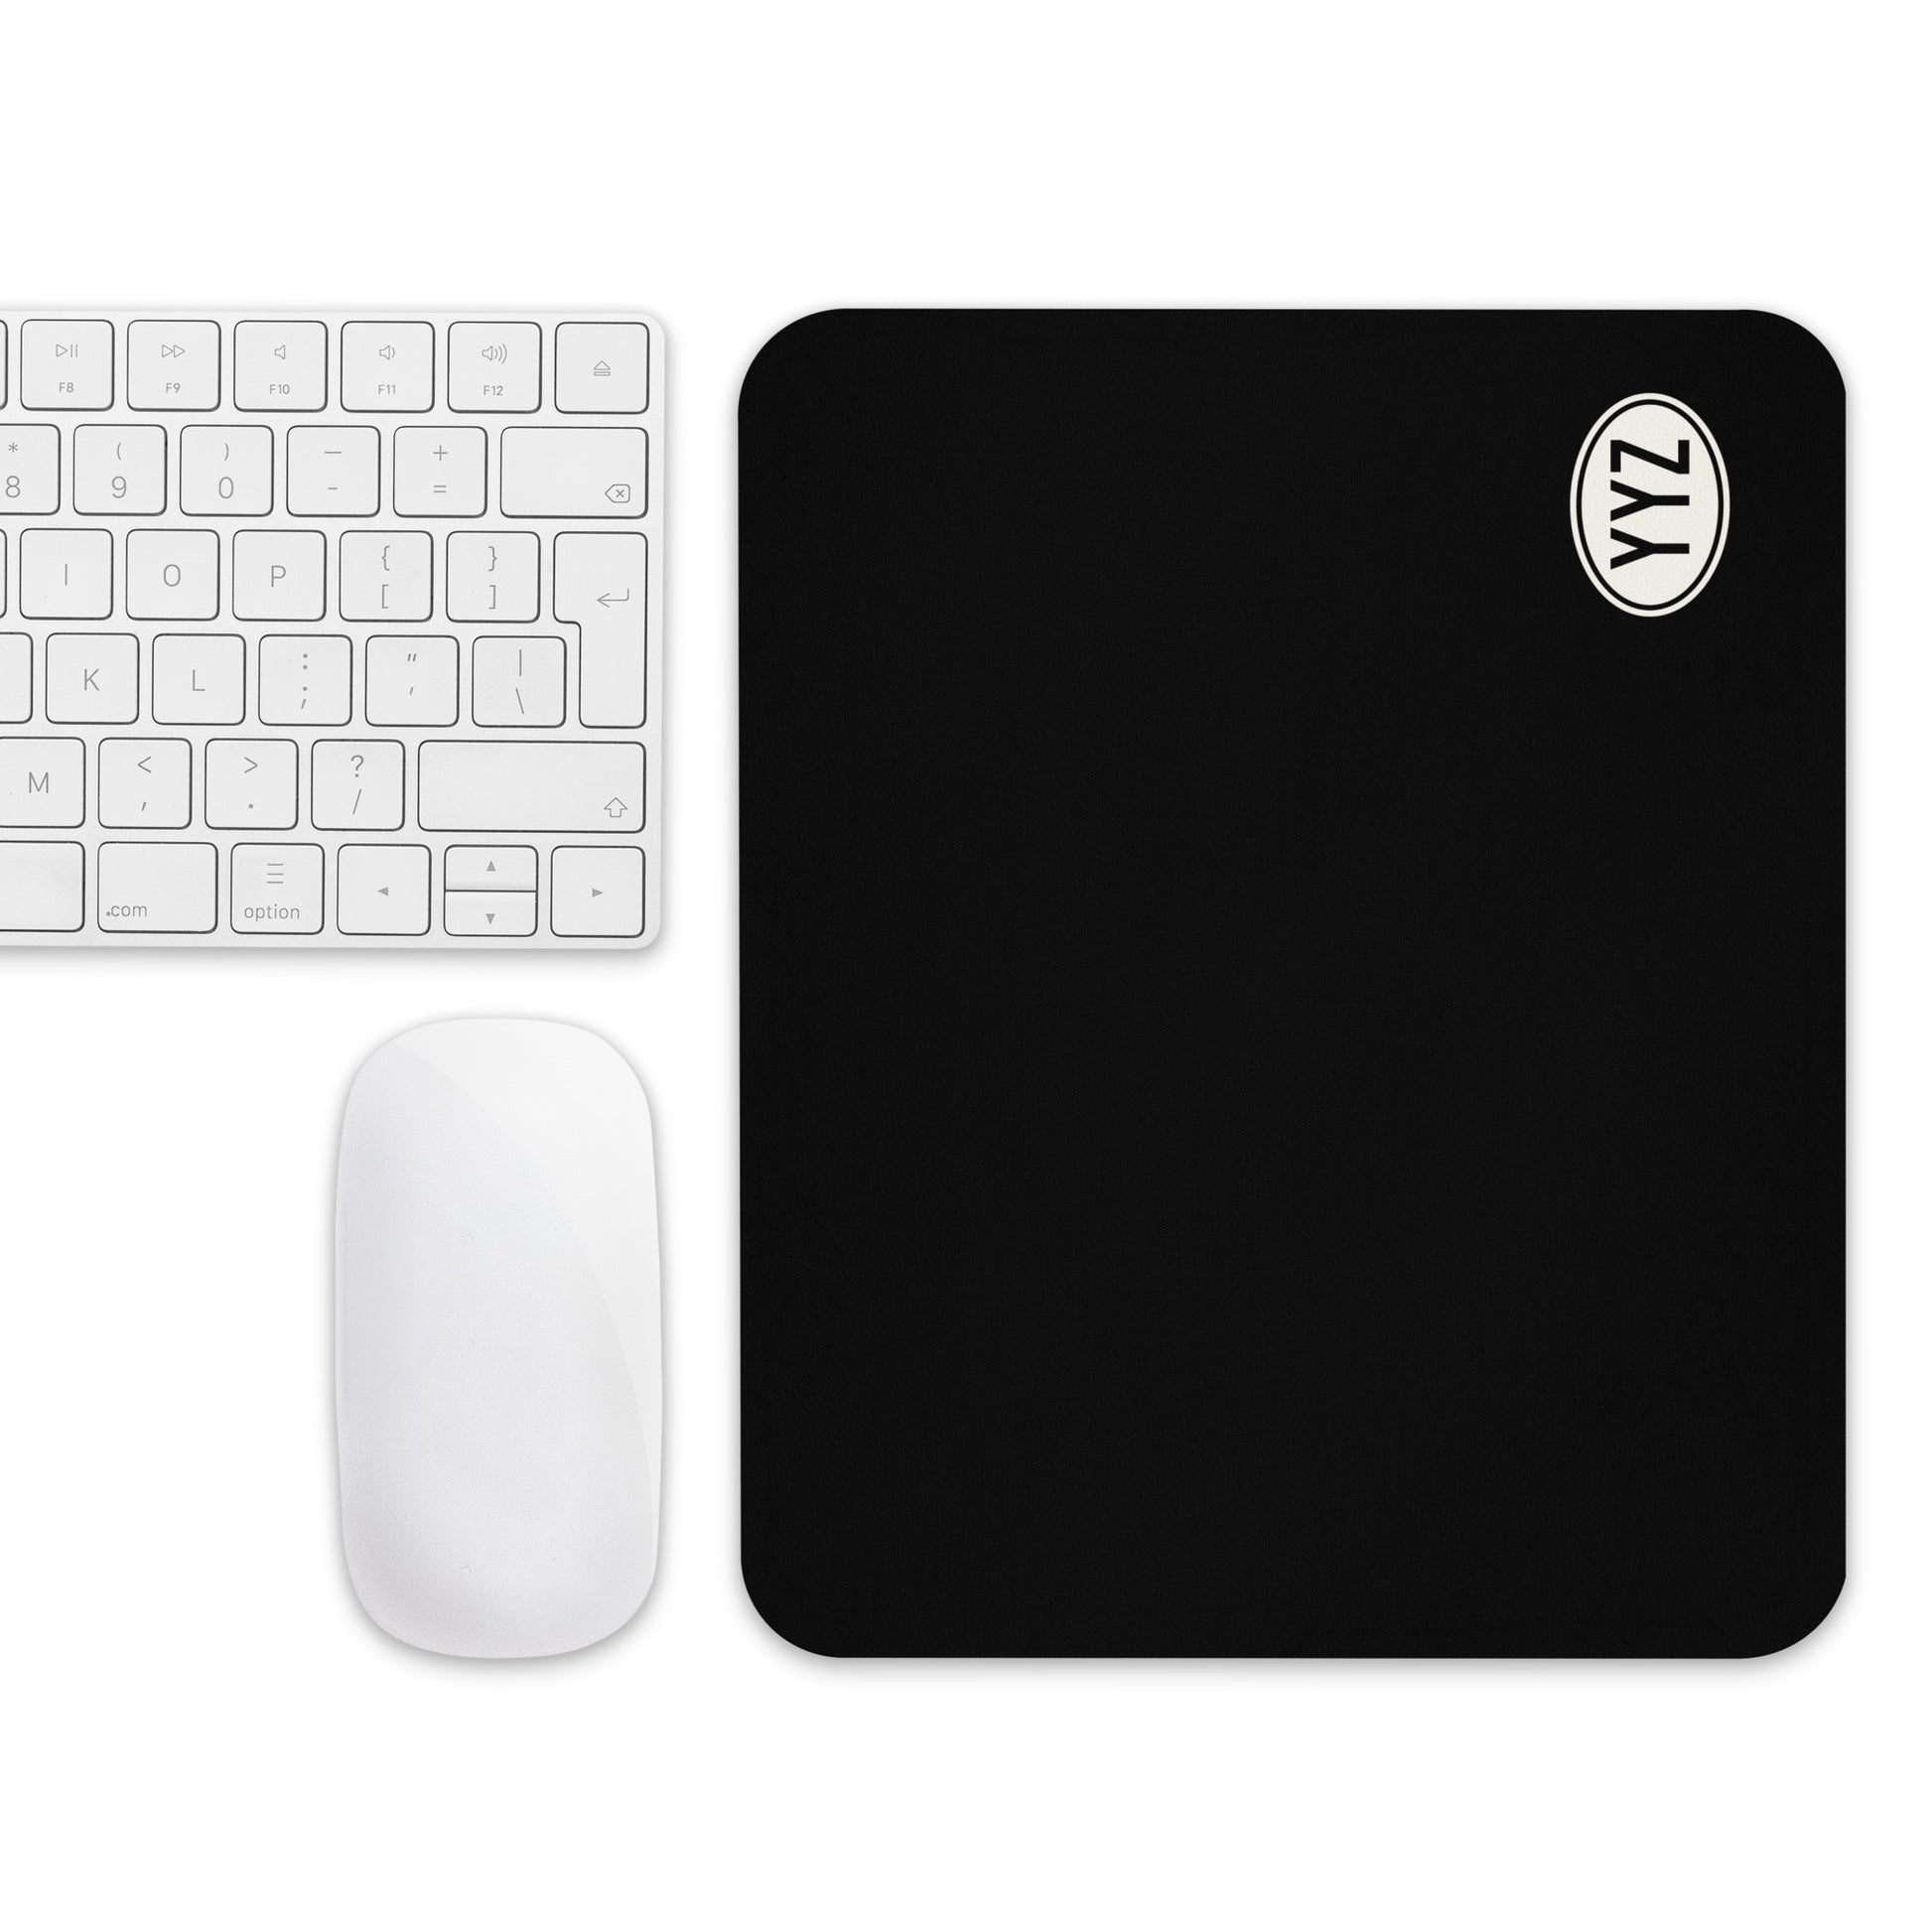 Unique Travel Gift Mouse Pad - White Oval • YYZ Toronto • YHM Designs - Image 04